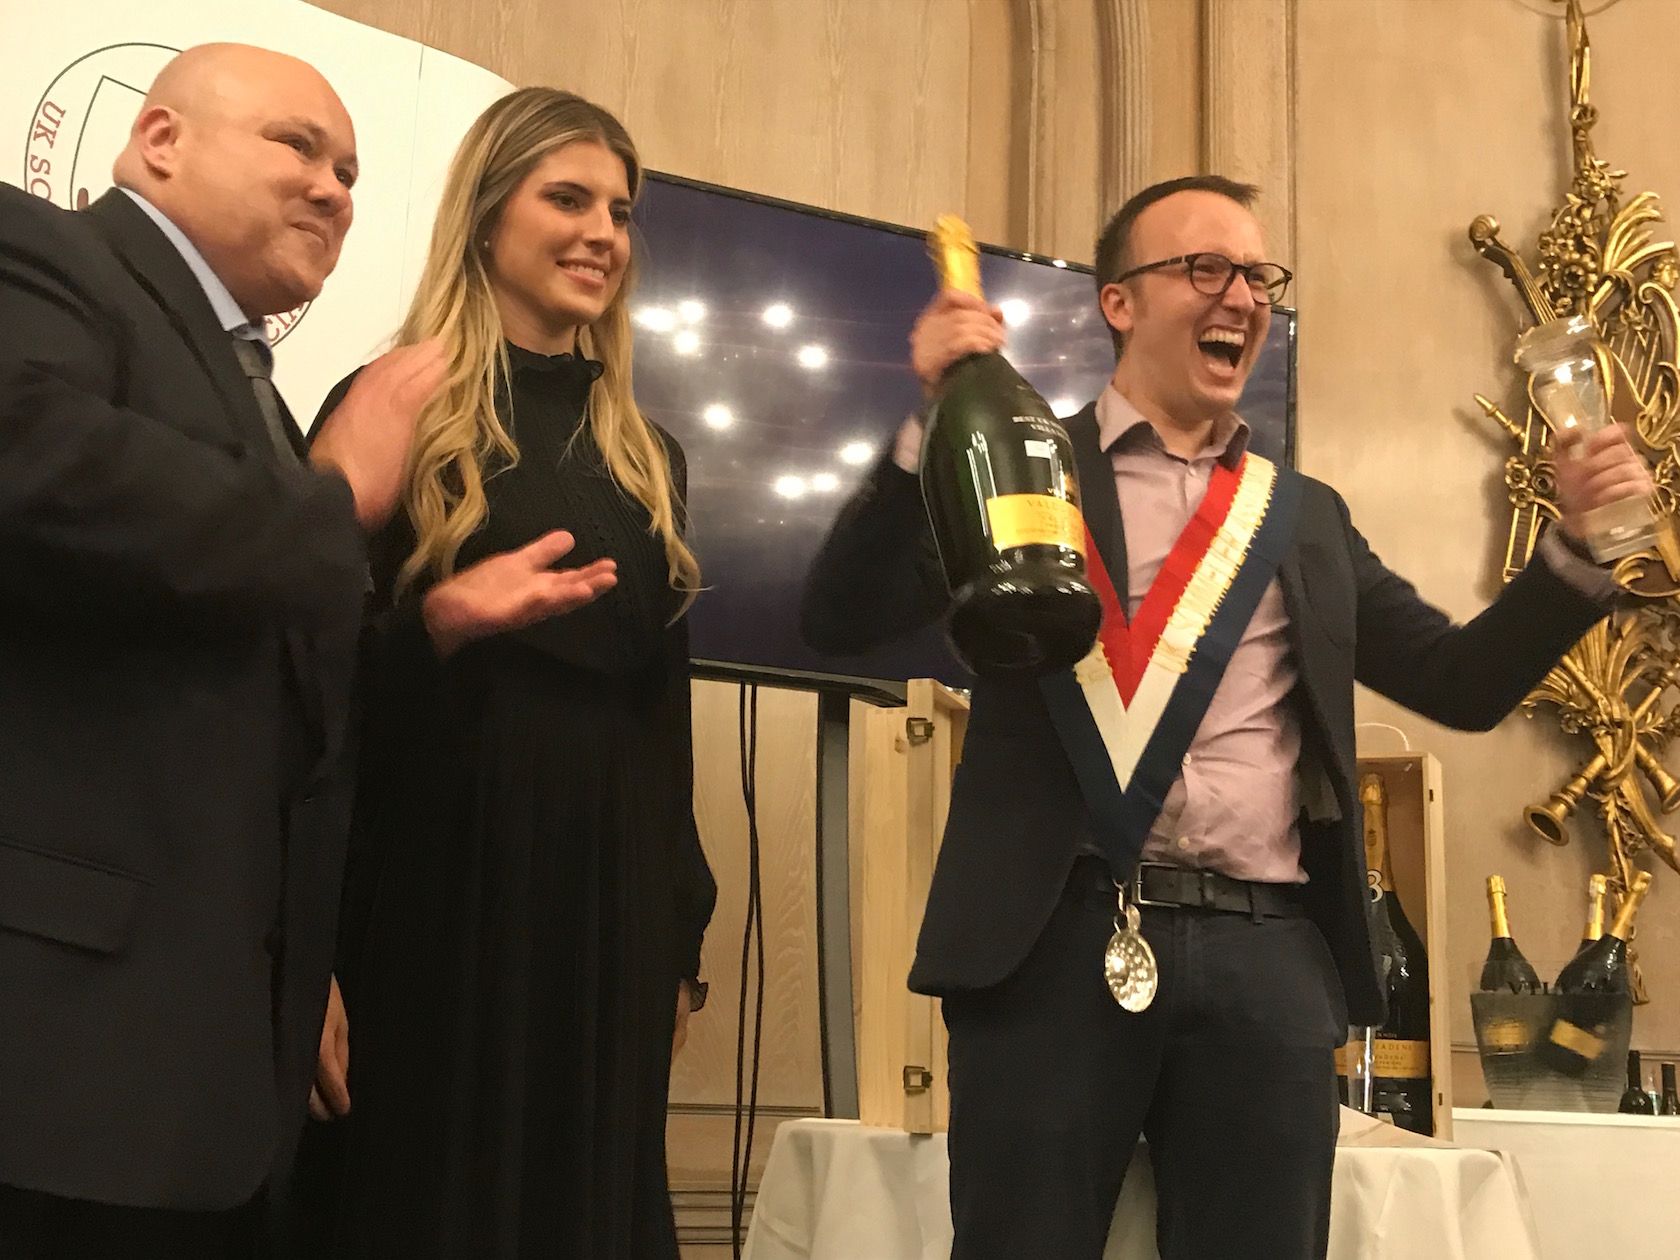 The Ritz’s Matteo Furlan named Best Sommelier UK of the Year